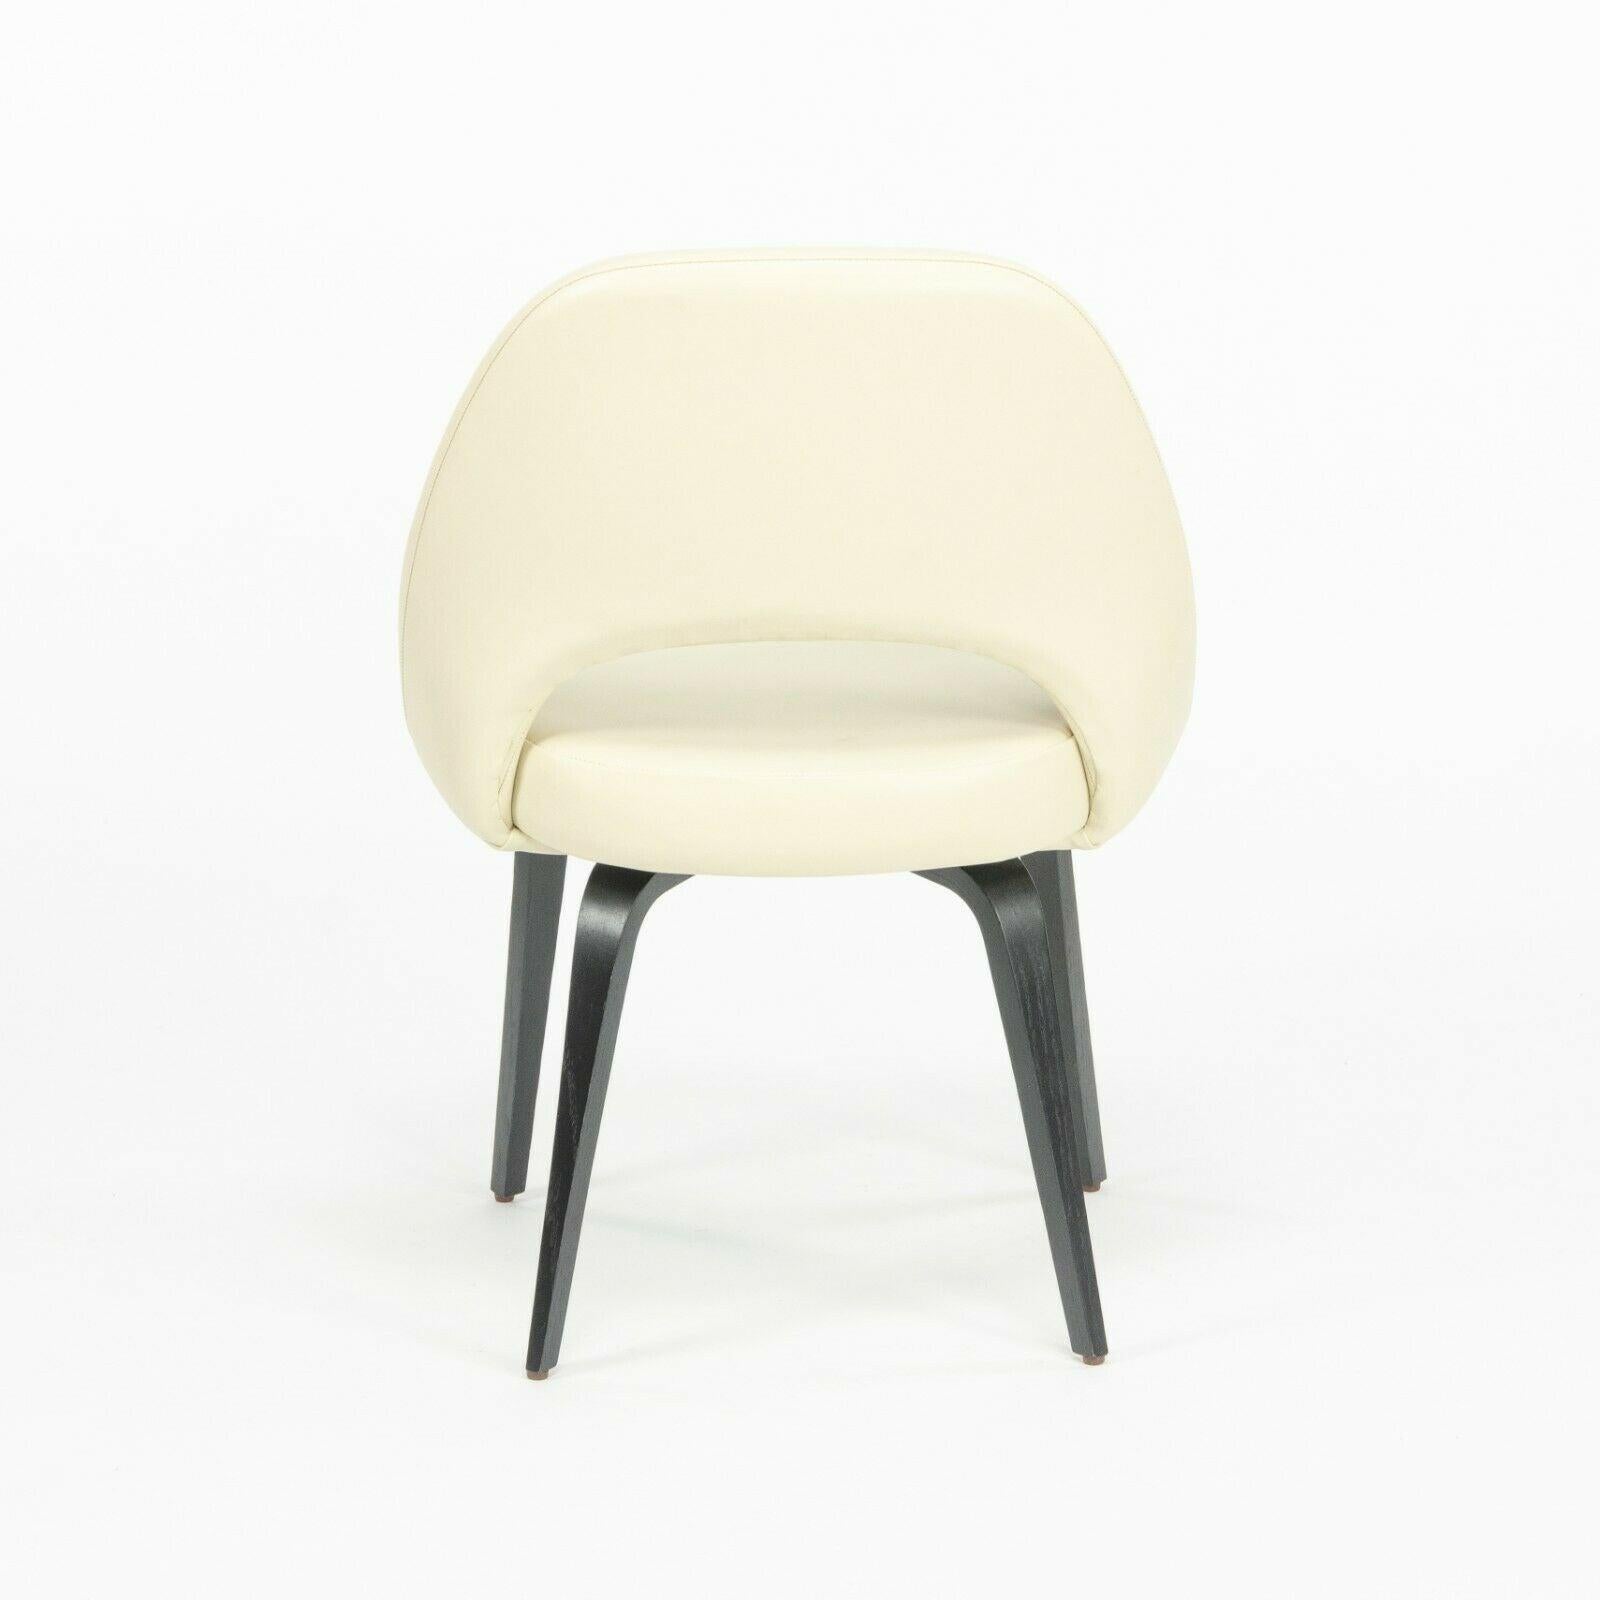 Contemporary Eero Saarinen Knoll 2020 Executive Side Chair w/ Wood Legs & Ivory Leather For Sale